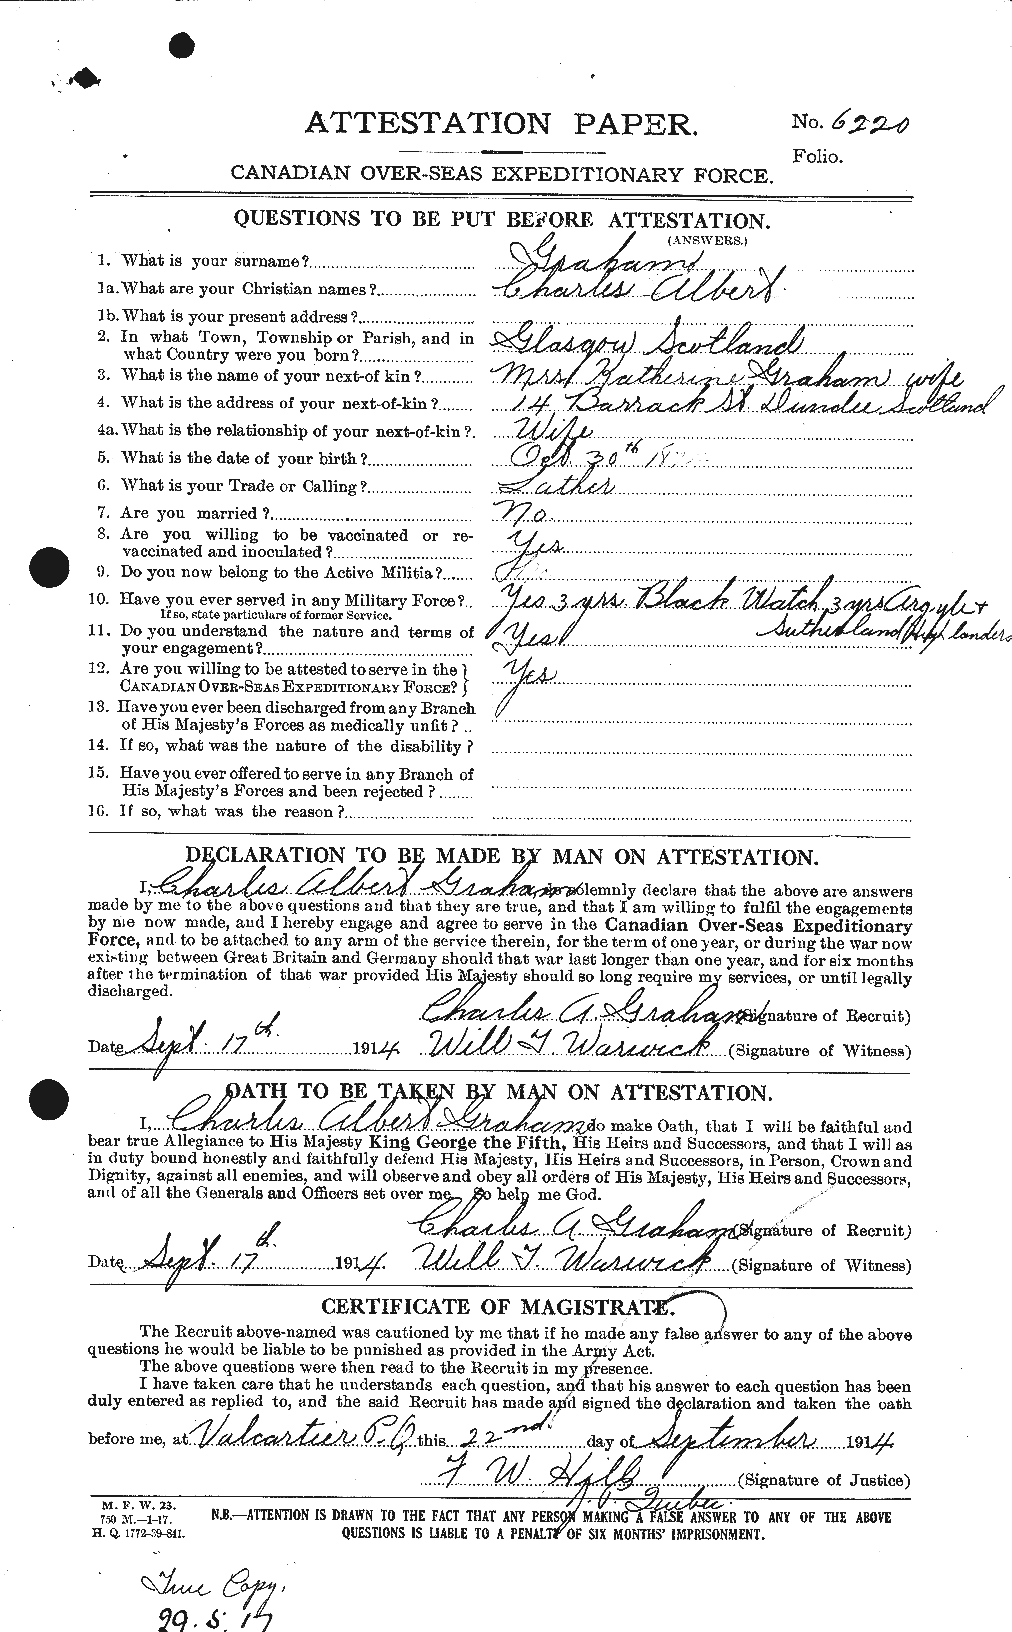 Personnel Records of the First World War - CEF 359704a